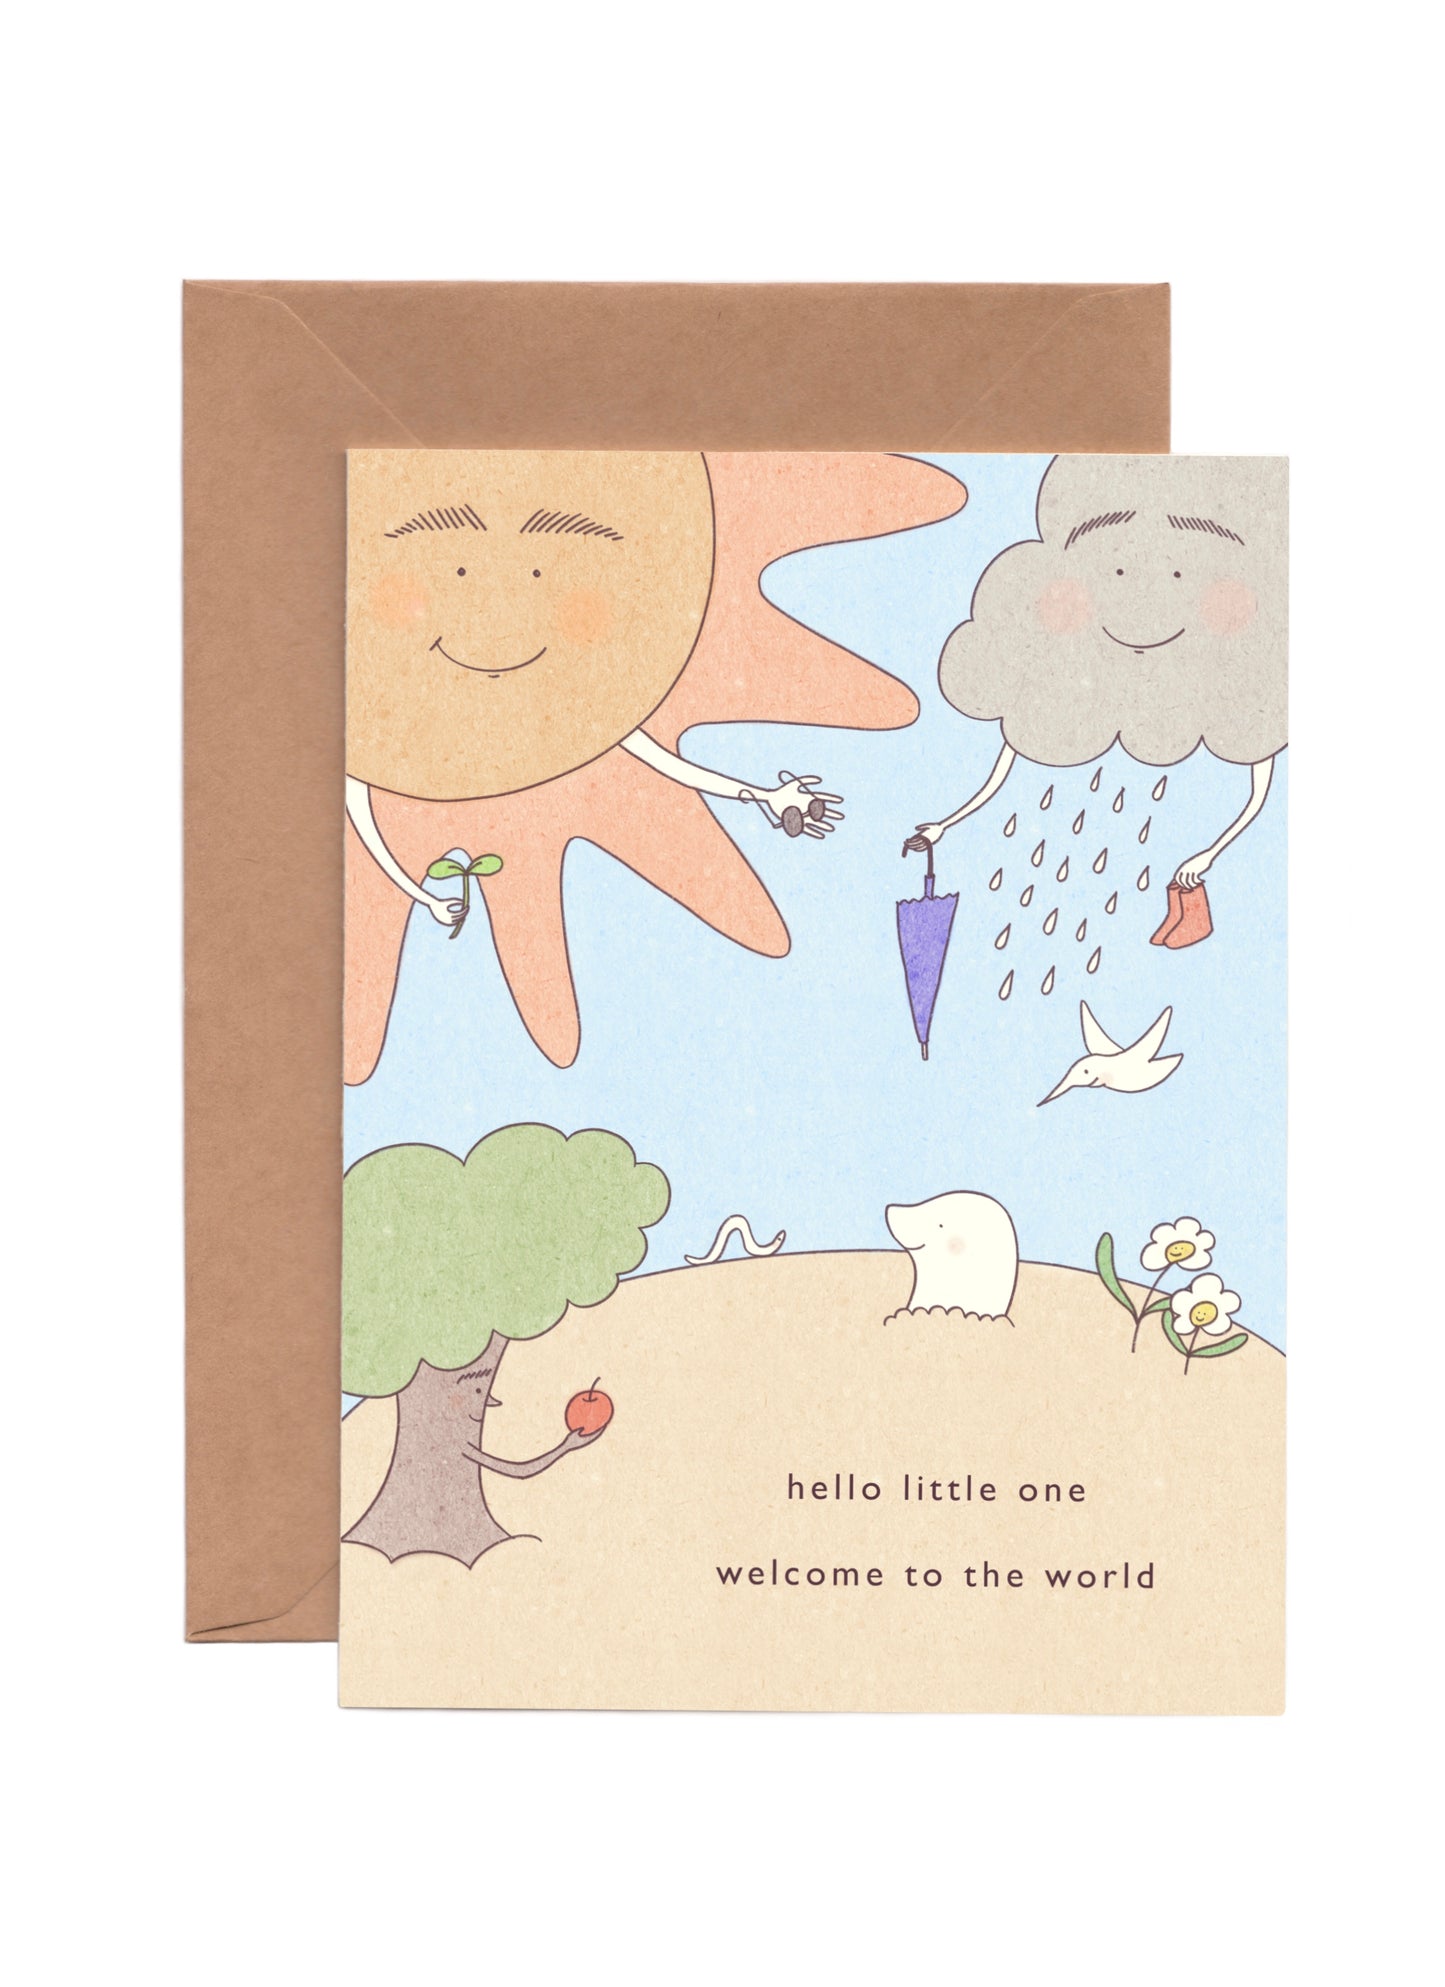 Cute New Born Baby Card with illustration of the mole baby coming out from the planet and natural elements such as the sun, cloud, tree, flowers welcoming the baby